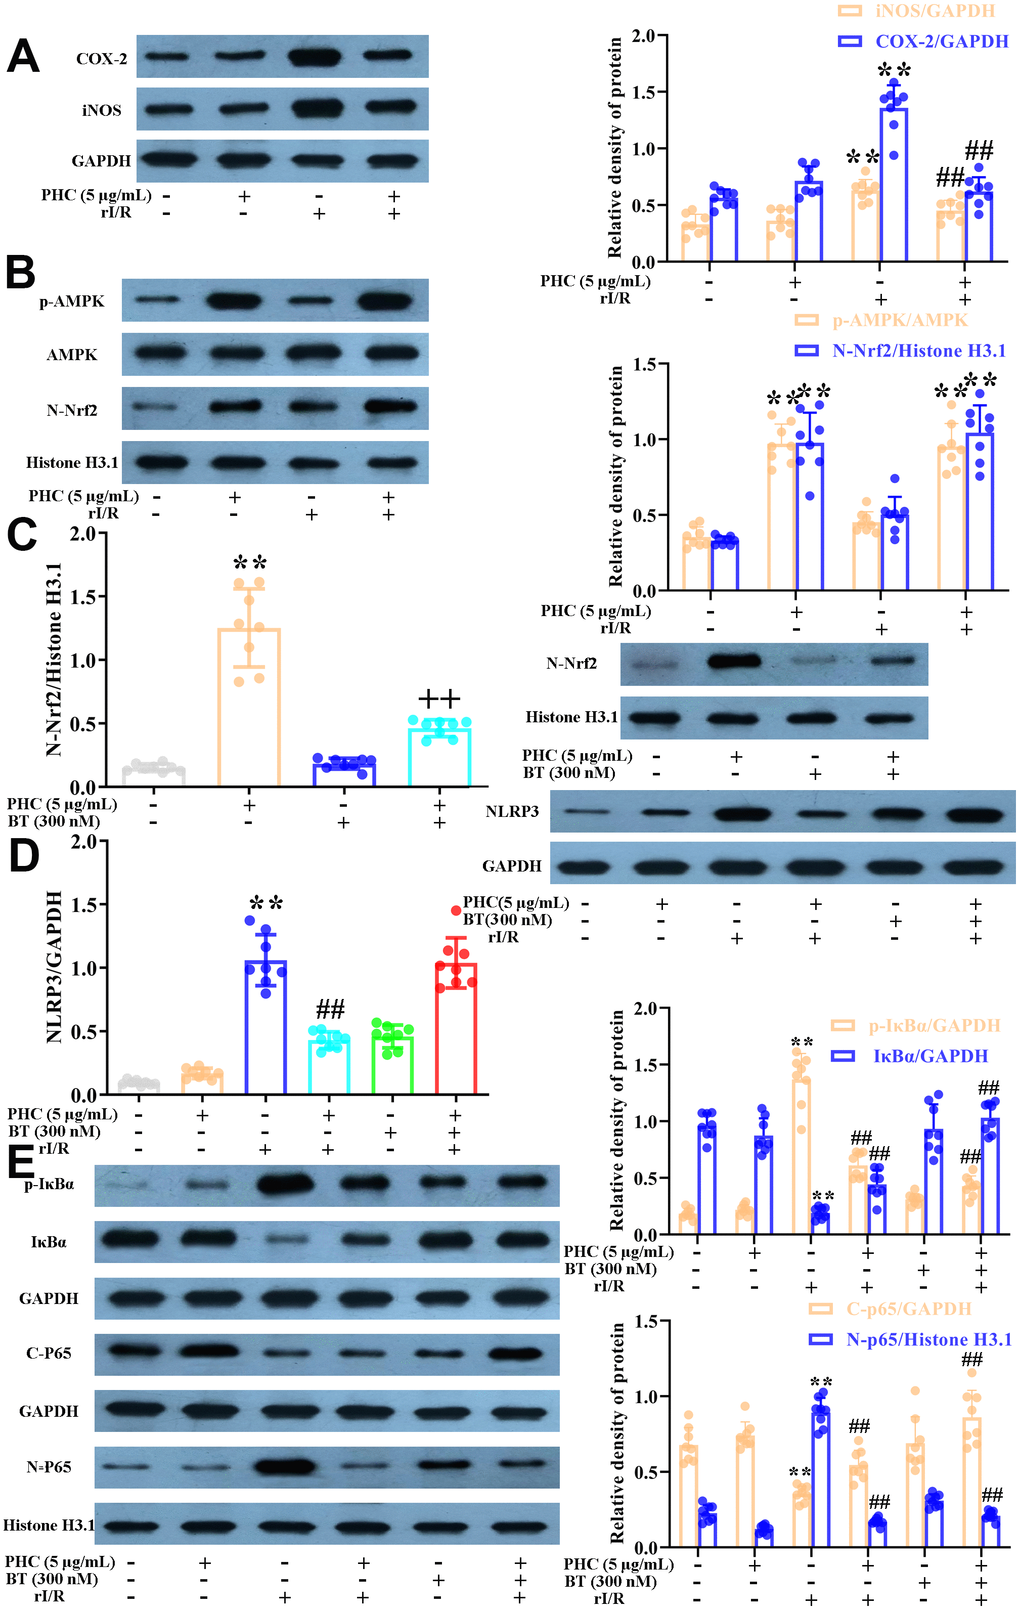 Effects of PHC on rI/R serum-induced inflammatory reactions in NR8383 cells. (A, B) NR8383 cells were stimulated with PHC (5 μg/mL) for 1 h and then treated with serum from rI/R rats for 24 h. Western blotting was used to measure the protein levels of COX-2 and iNOS (A), as well as the nuclear concentration of Nrf2 and the protein levels of AMPK and p-AMPK (B). (C) NR8383 cells were stimulated with brusatol (an antagonist of Nrf2, 300 nM) for 1 h and then exposed to PHC (5 μg/mL) for 1 h before being treated with serum from rI/R rats for 24 h. Western blotting was used to measure Nrf2 levels. (D) NR8383 cells were stimulated with brusatol (300 nM) for 1 h, and then exposed to PHC (5 μg/mL) for 1 h before being treated with serum from rI/R rats for 24 h. Western blotting was used to measure the protein levels of NLRP3. (E) NR8383 cells were stimulated with brusatol (300 nM) for 1 h and then exposed to PHC (5 μg/mL) for 1 h before being treated with serum from rI/R rats for 24 h. Western blotting was used to measure the cytoplasmic and nuclear concentrations of p65, as well as the protein levels of IκBα and p-IκBα. GAPDH was used as an internal control for total and cytoplasmic proteins, while histone H3.1 was used as an internal control for nuclear proteins. Data are presented as the mean ± S.D. (n = 8). *P P #P ##P +P ++P 